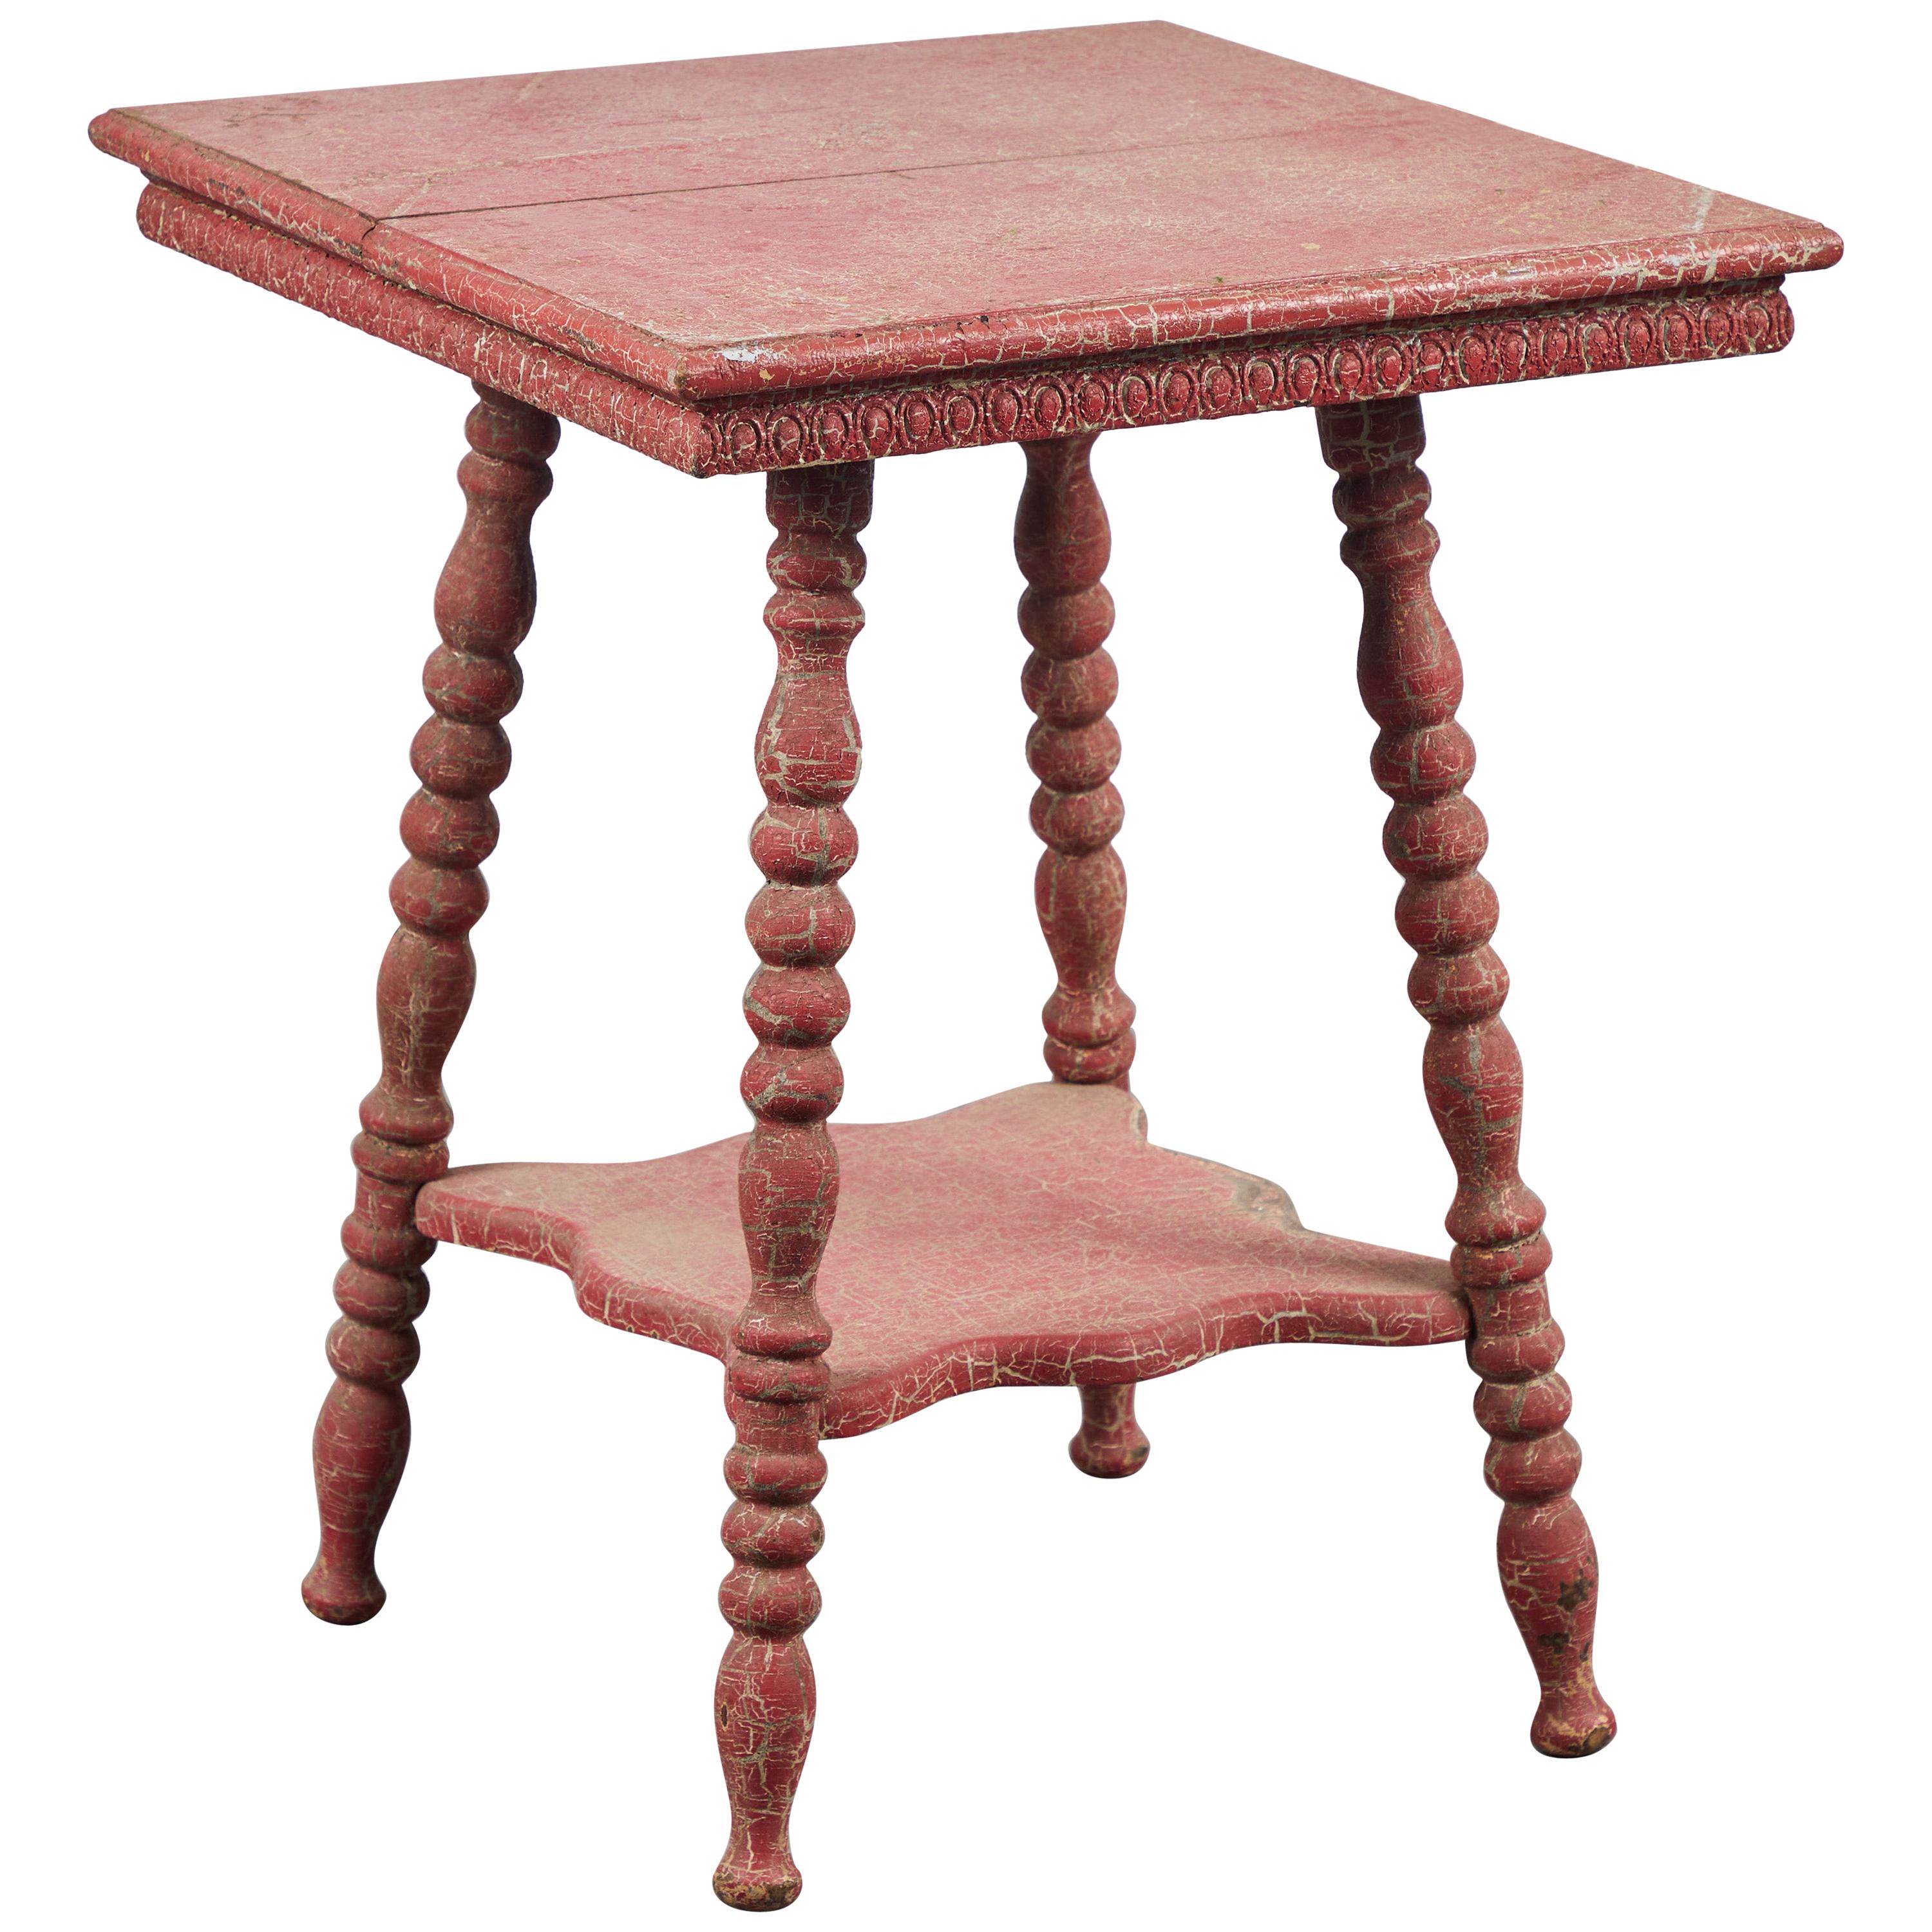 Early American Red Painted Side Table